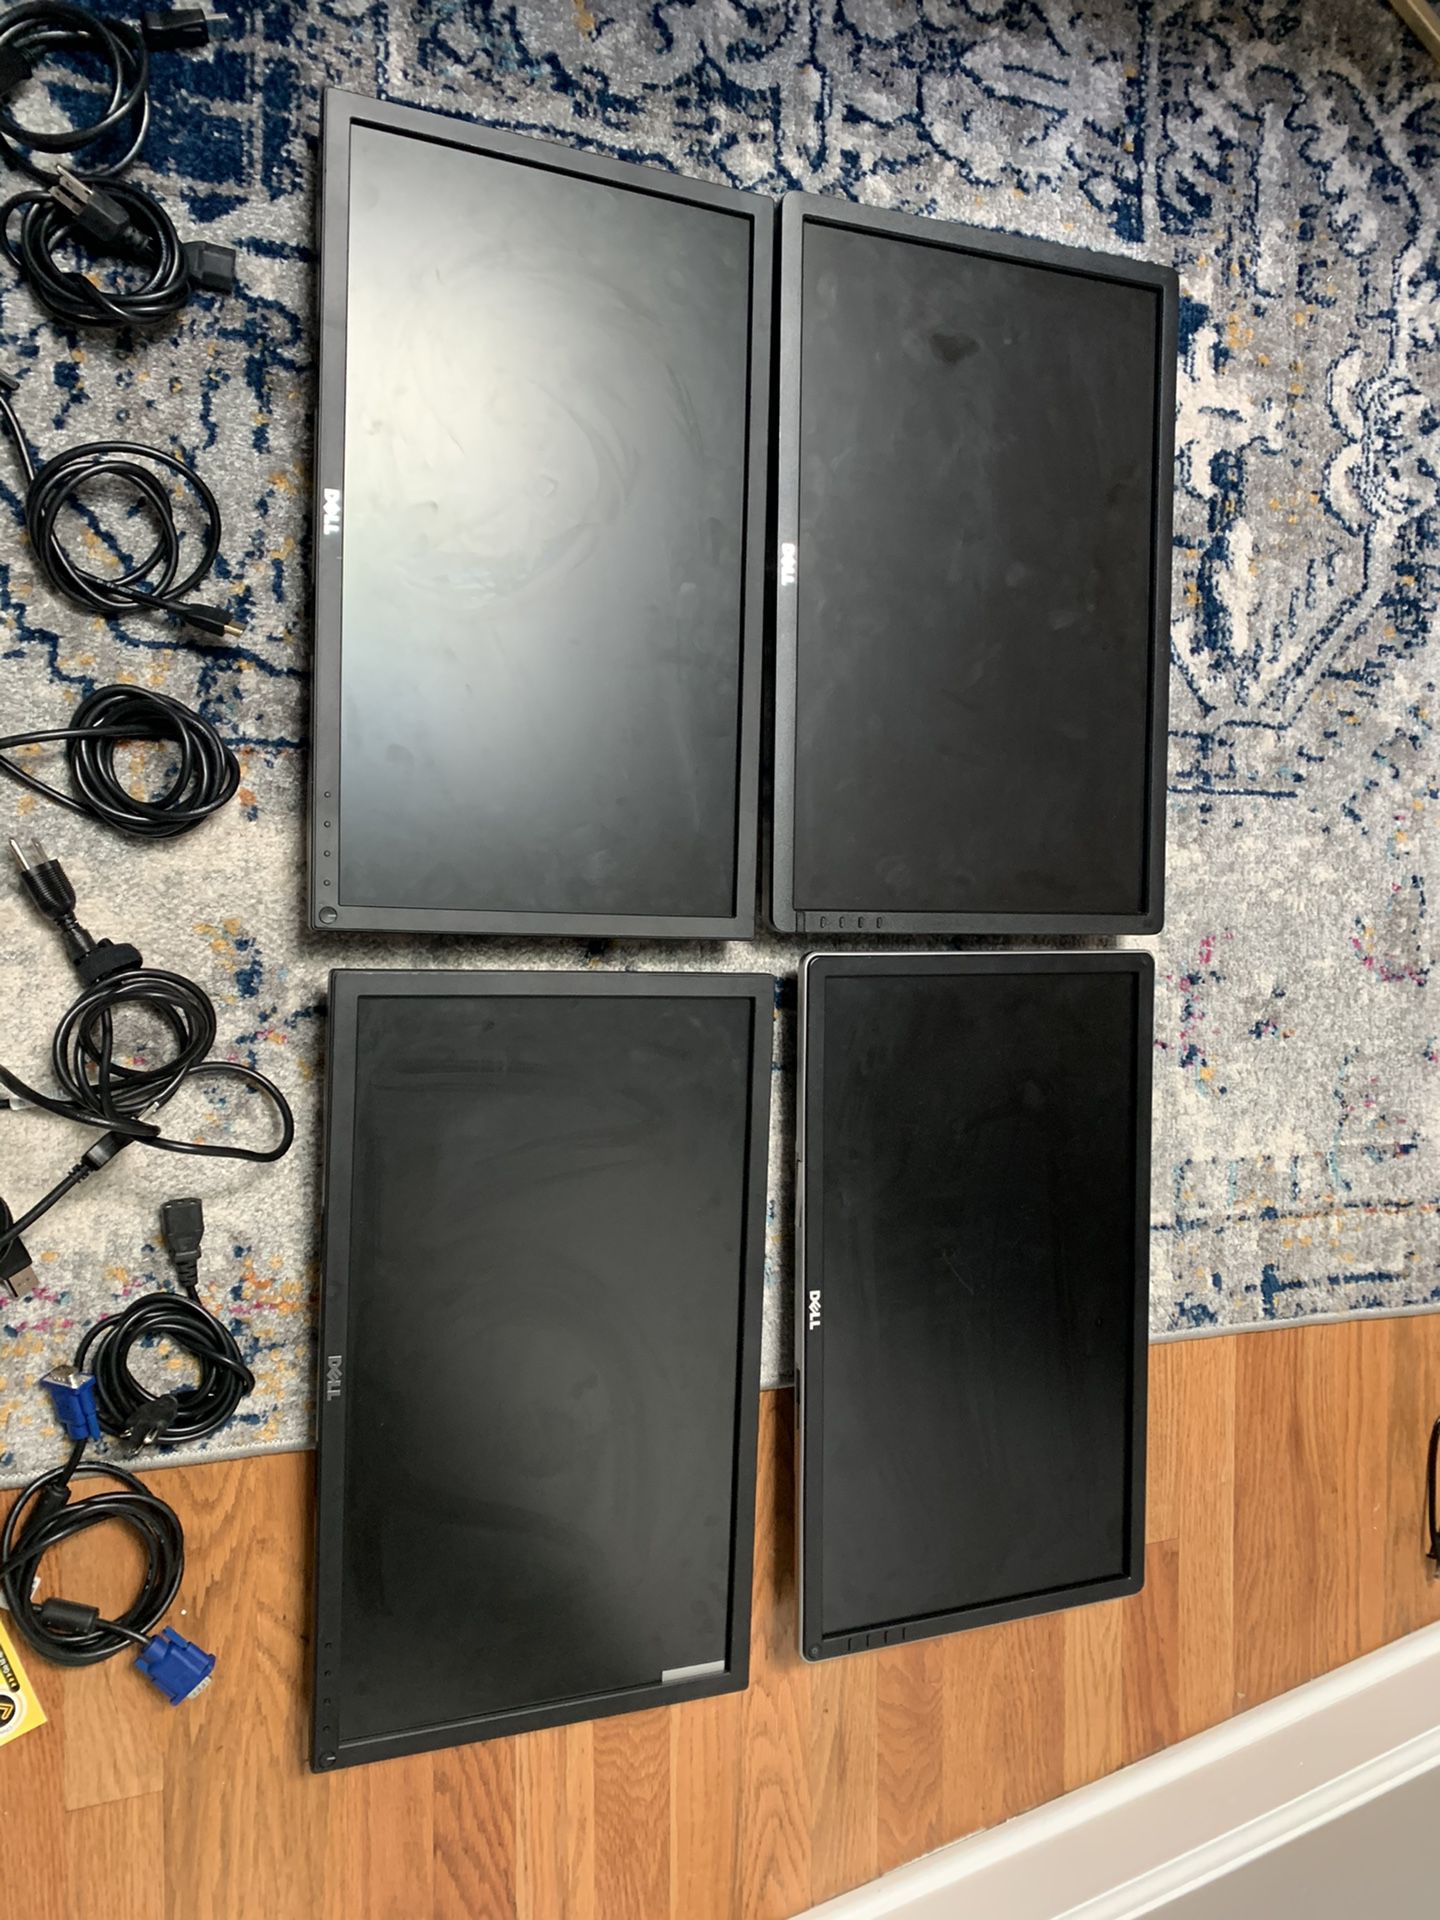 Dell 22” Wide screen monitors (4 available, price is for 1)